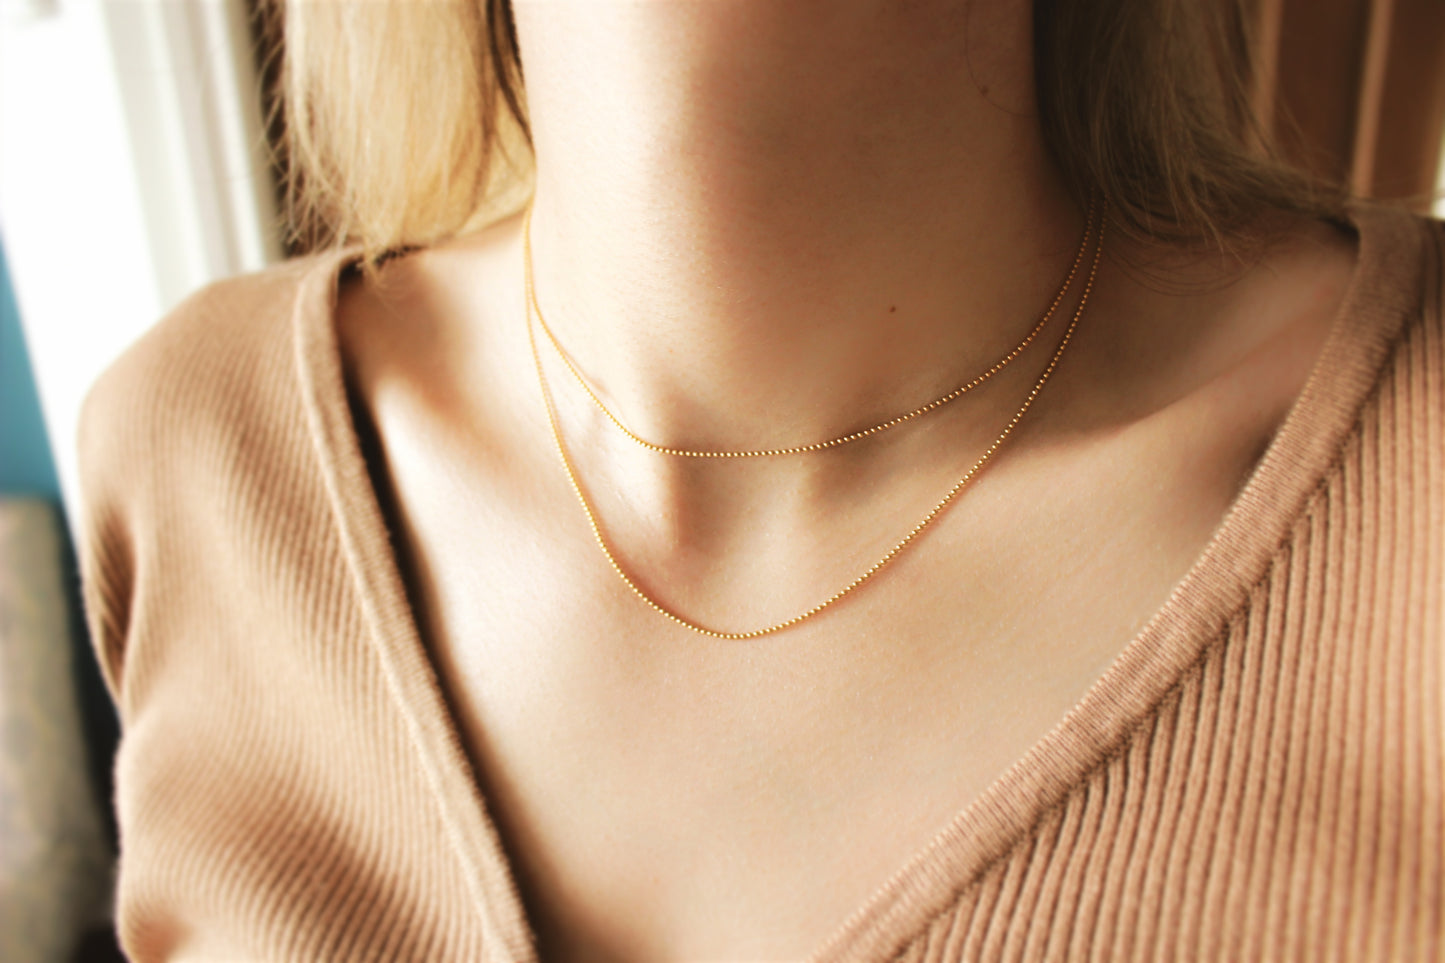 14k gold filled ball chain ∙ 1 mm ∙ Gold necklace ∙ Dainty choker necklace ∙ Minimalist jewelry for women